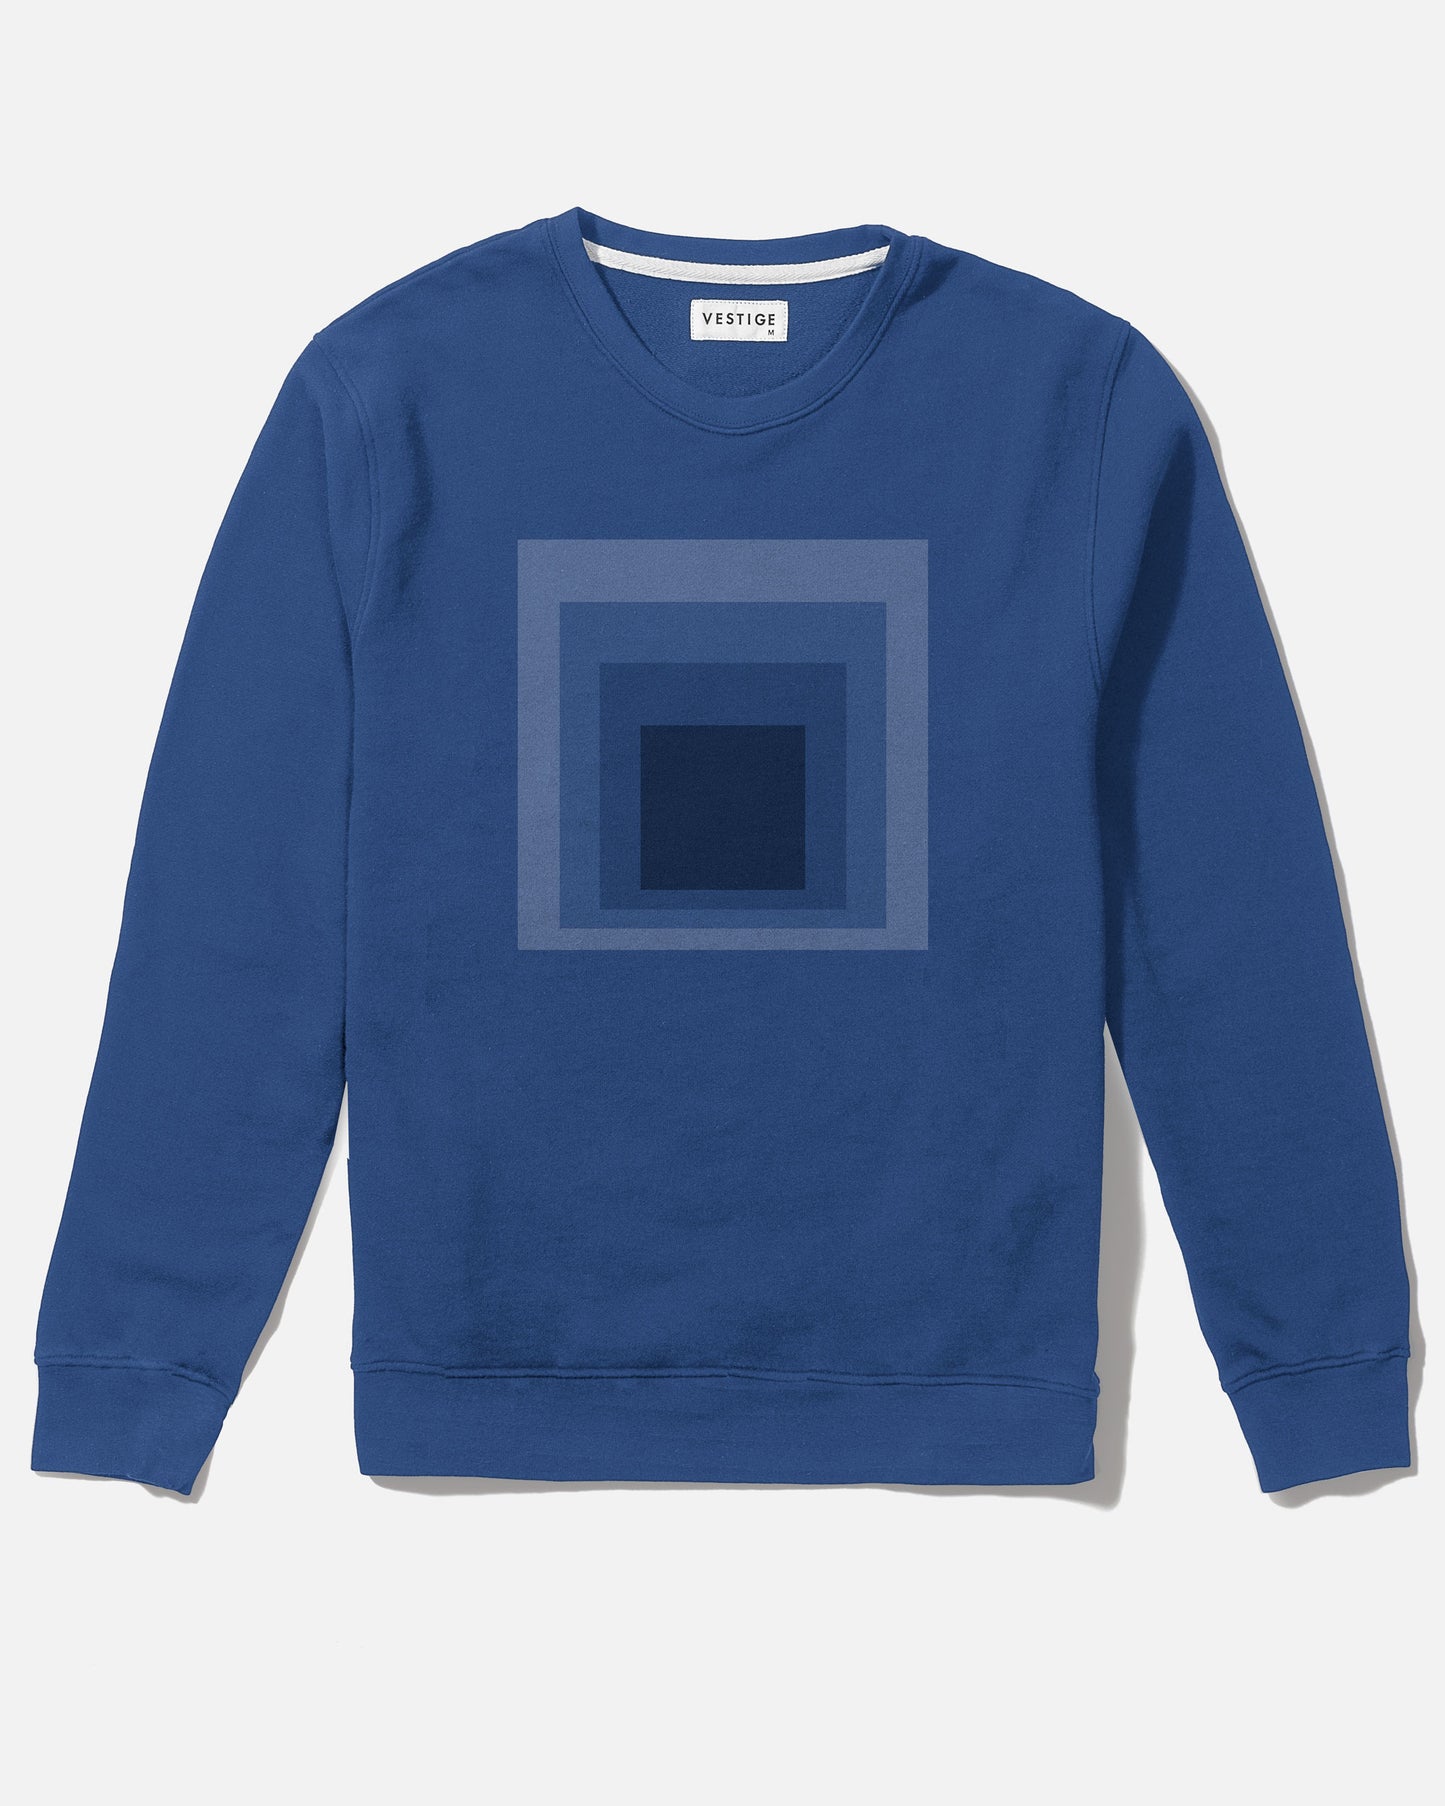 Homage to the Square Sweatshirt, Blue